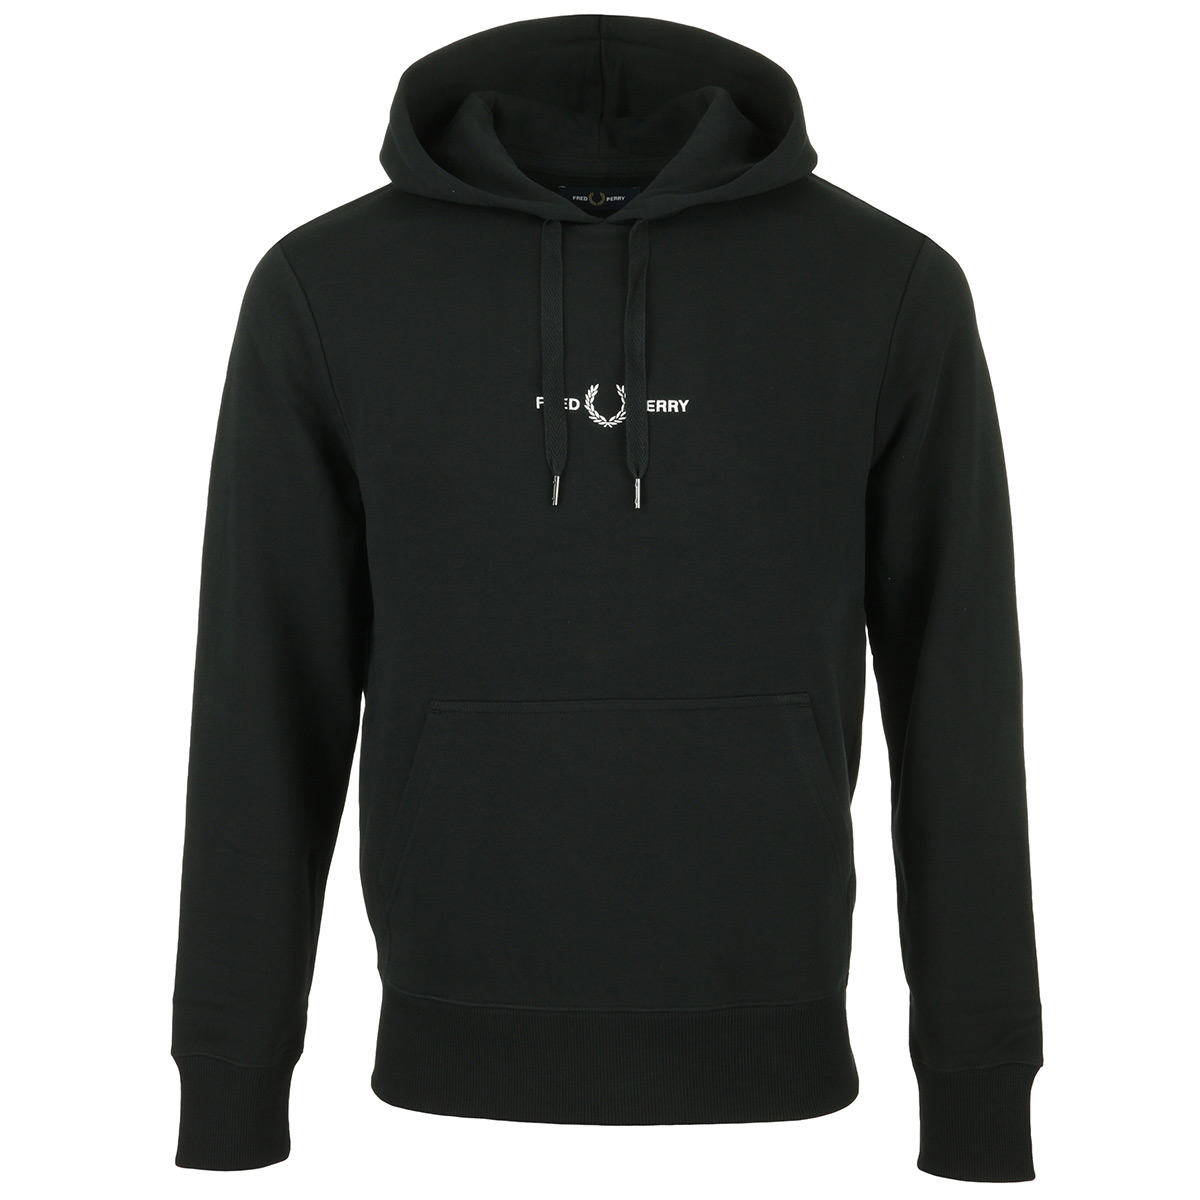 Fred Perry Embroidered Hooded Sweatshirt